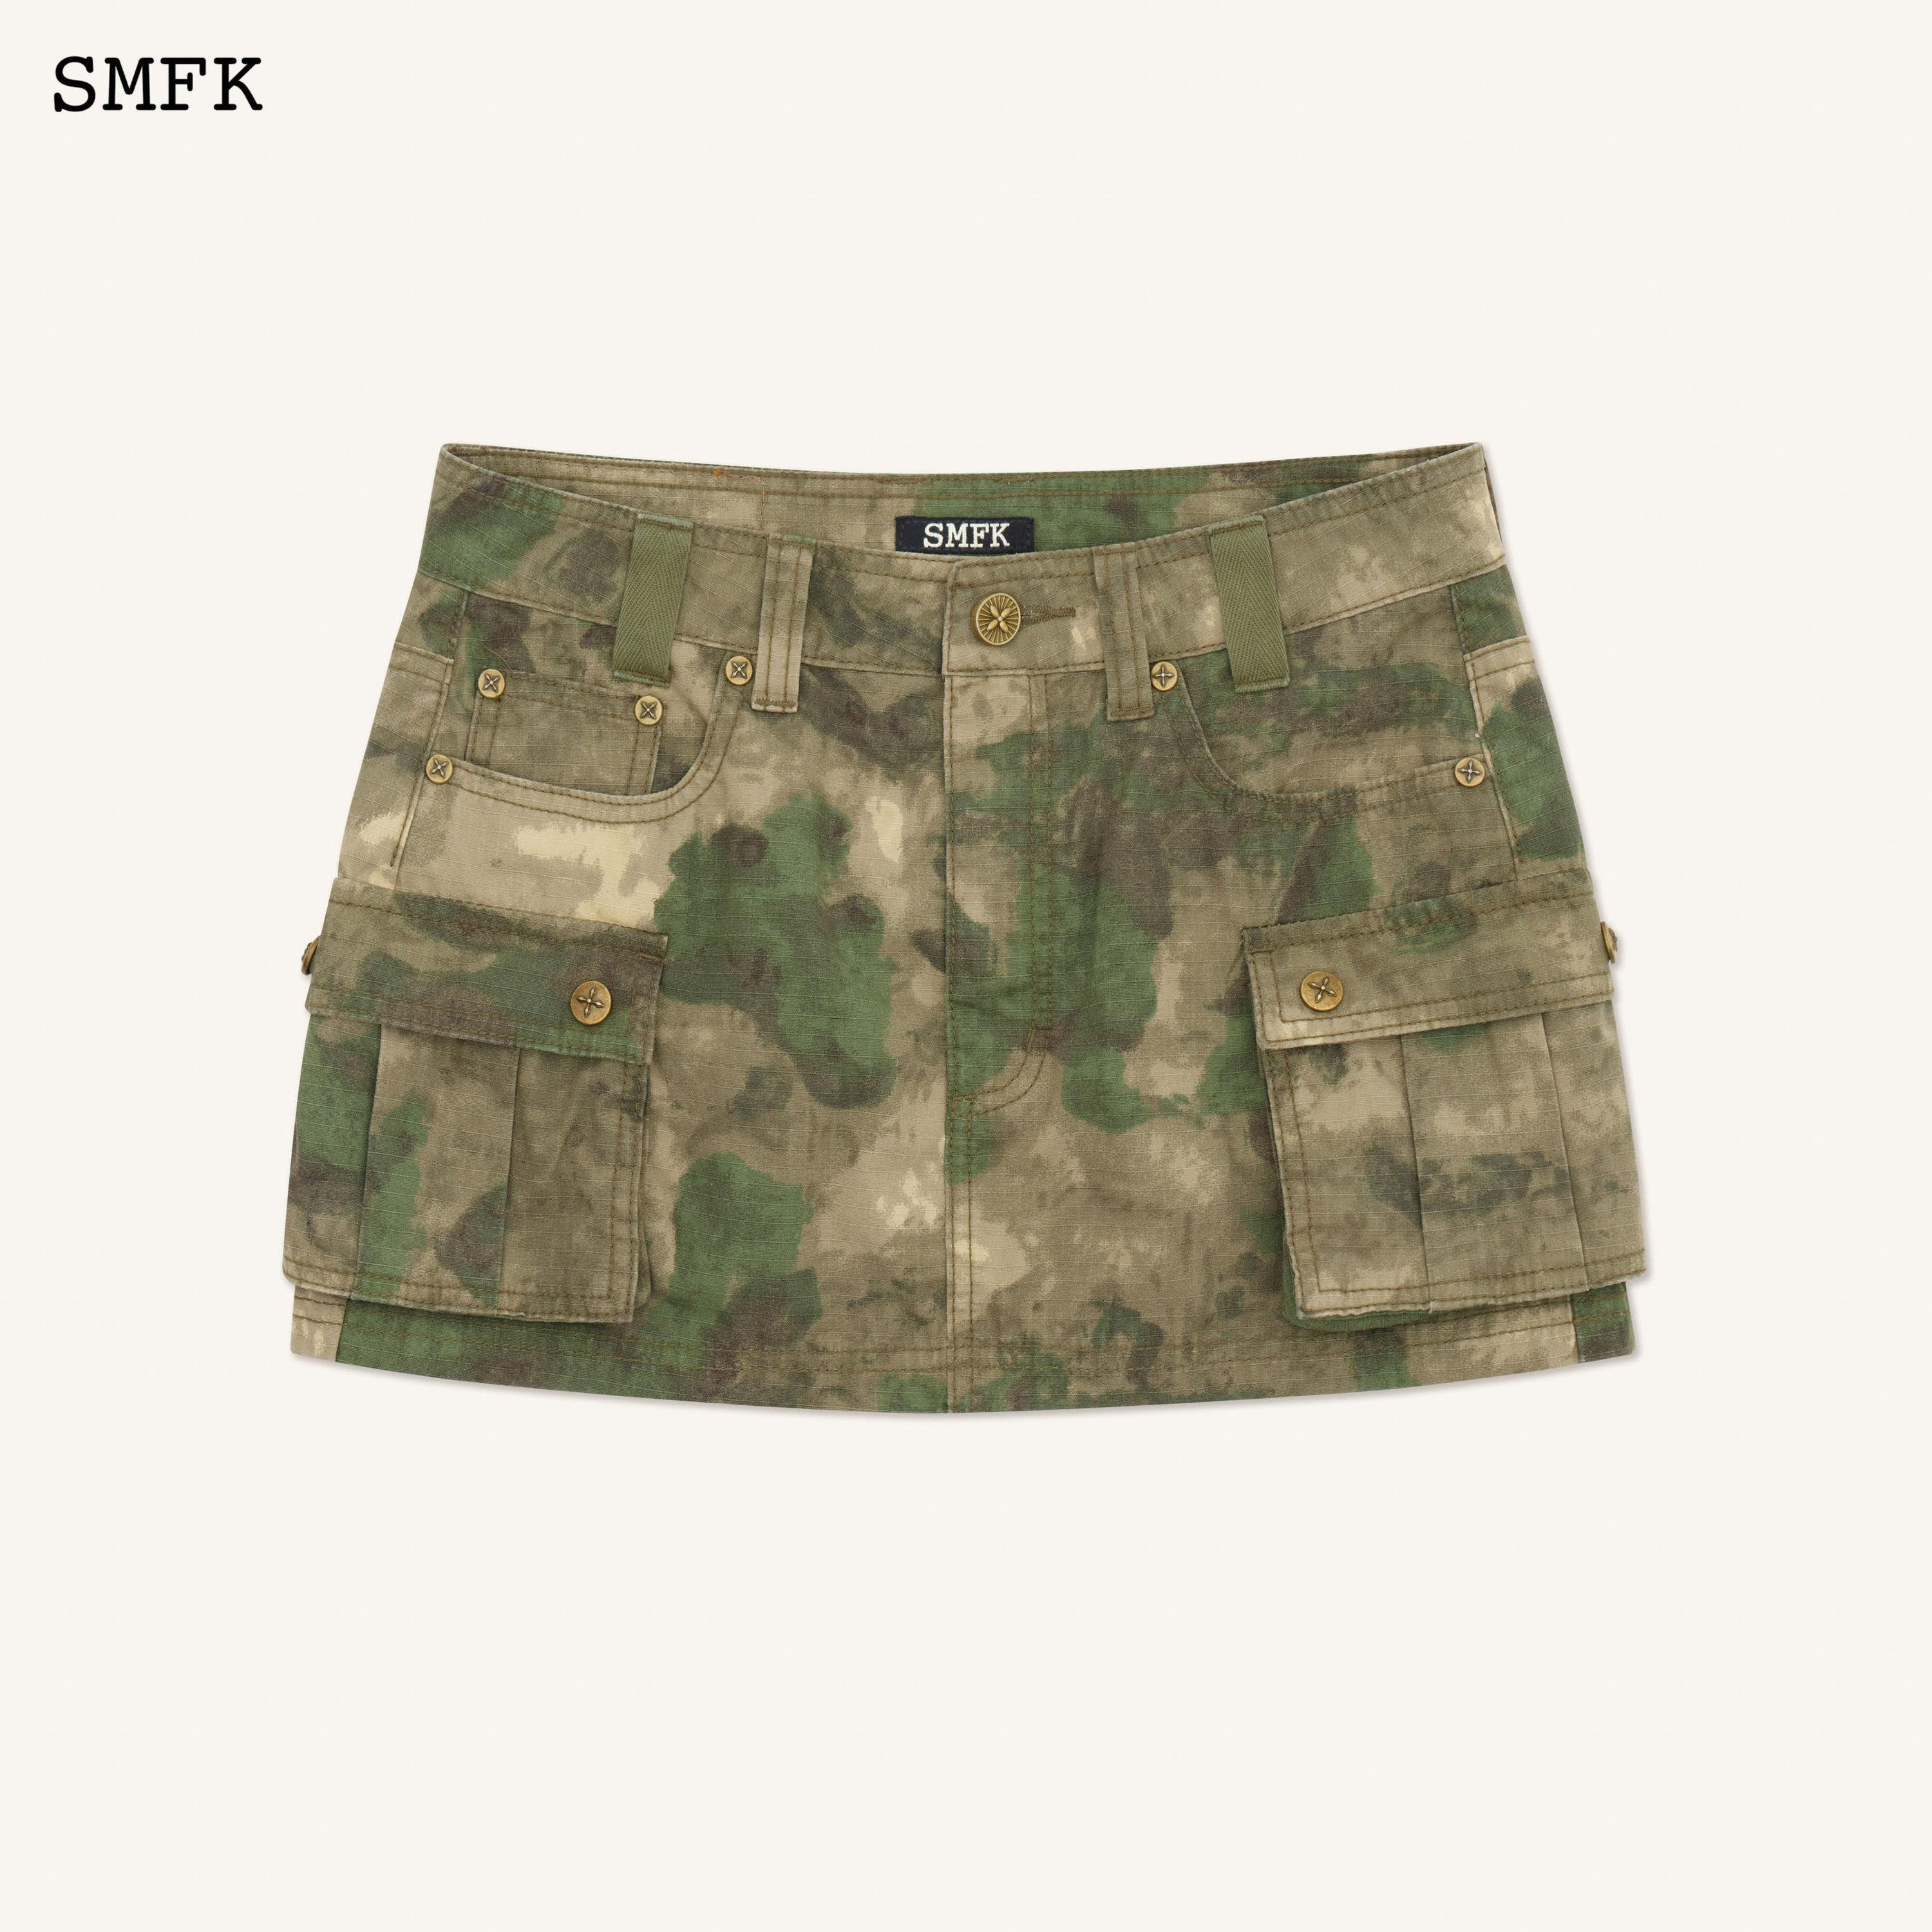 Compass Viper Green Camouflage Workwear Mini Skirt - SMFK Official